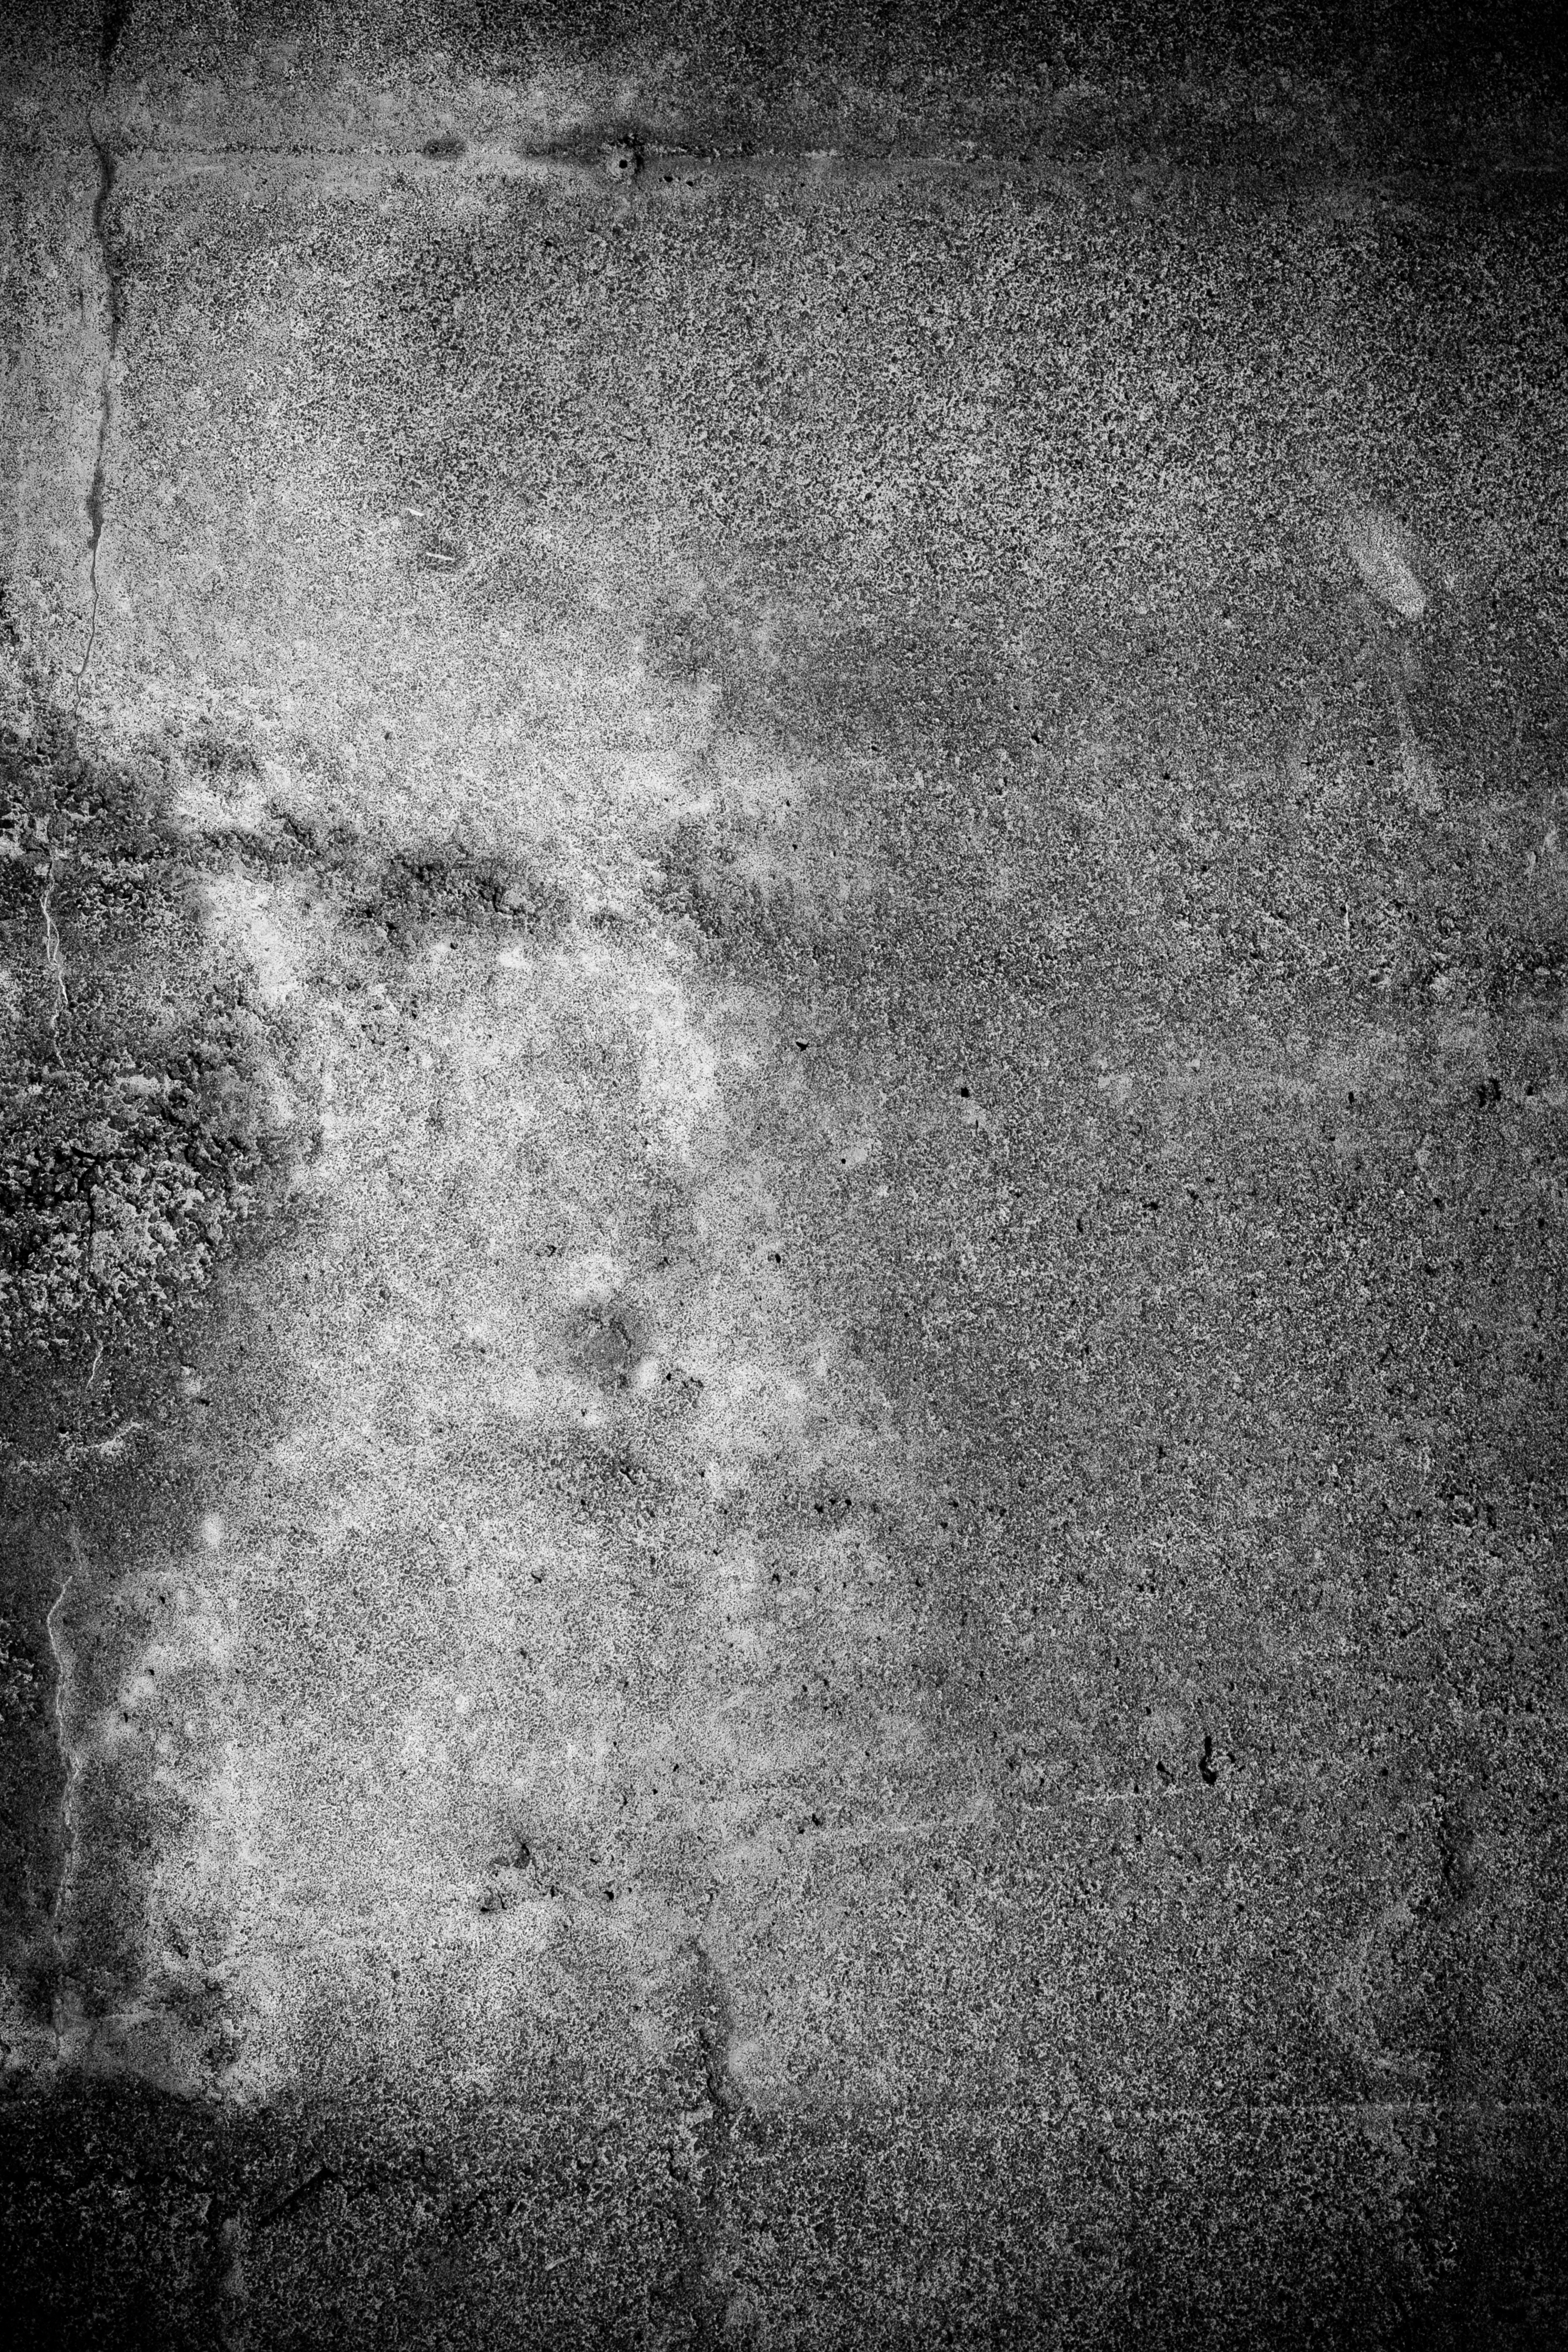 Cracked grunge wall texture photo